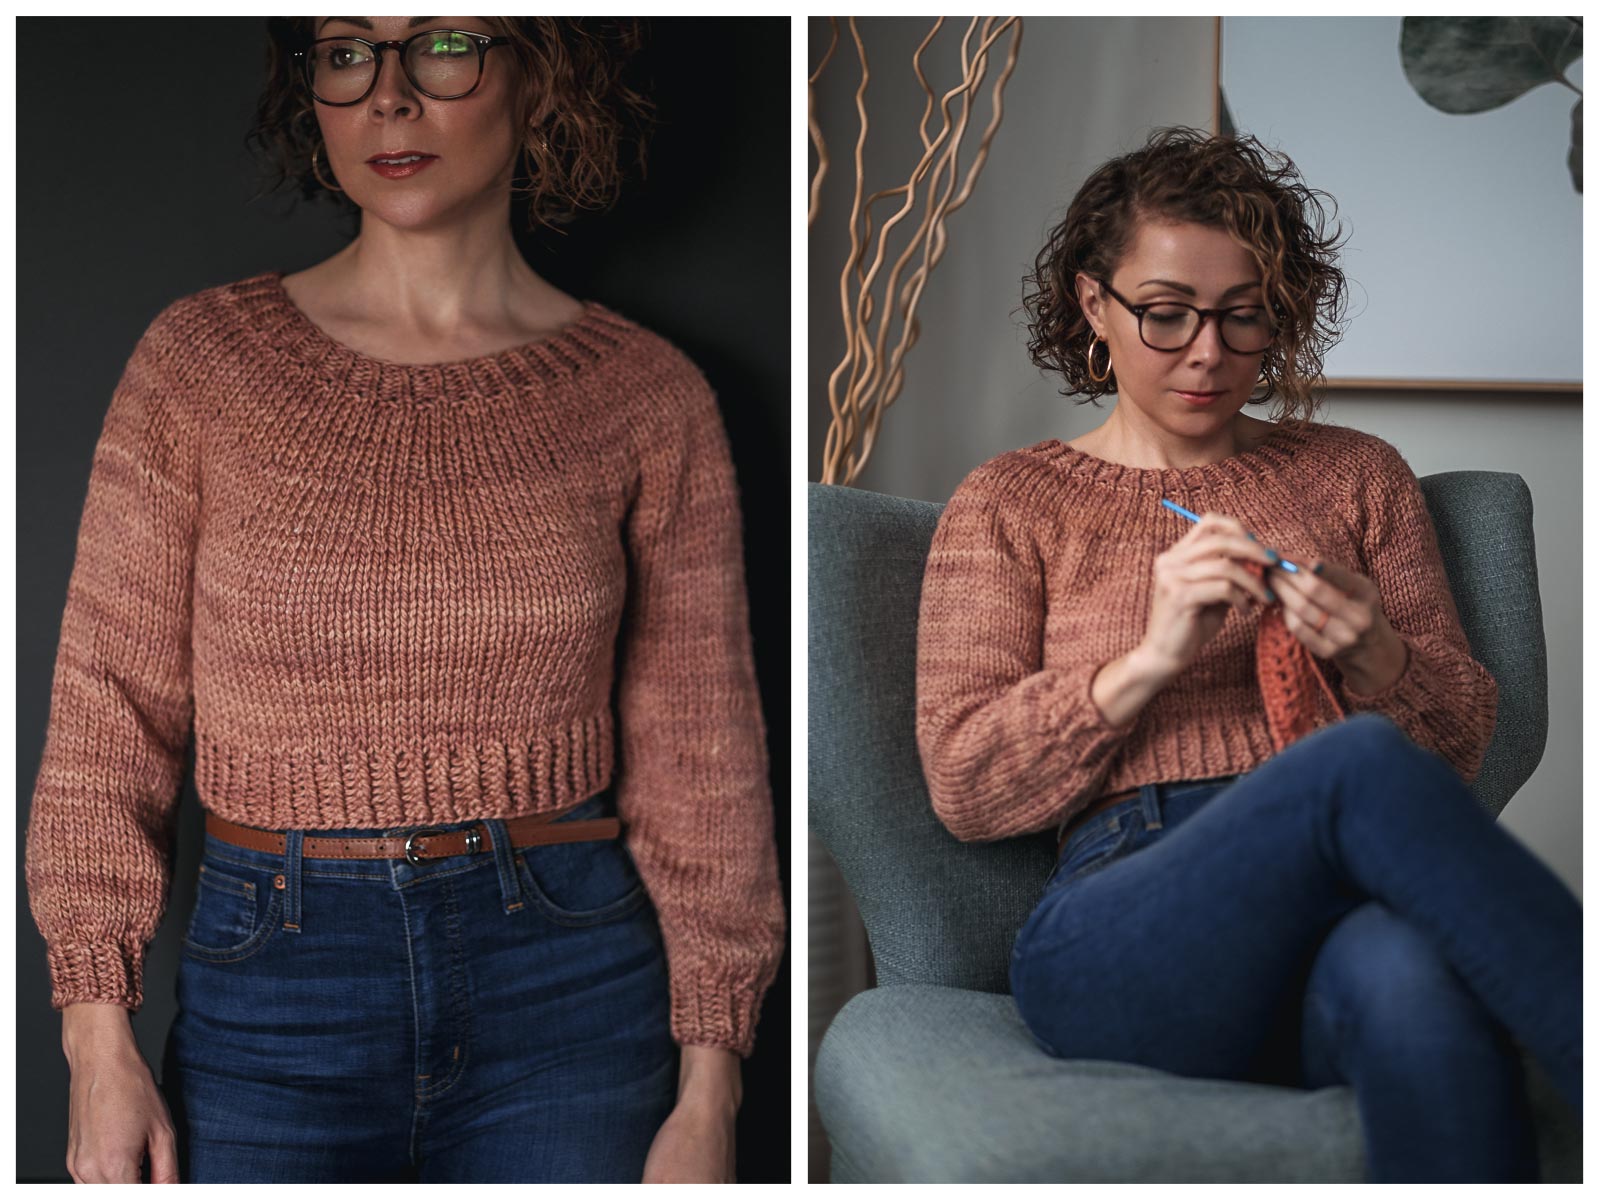 How to Knit a Sweater: Beginner's Tips and Patterns